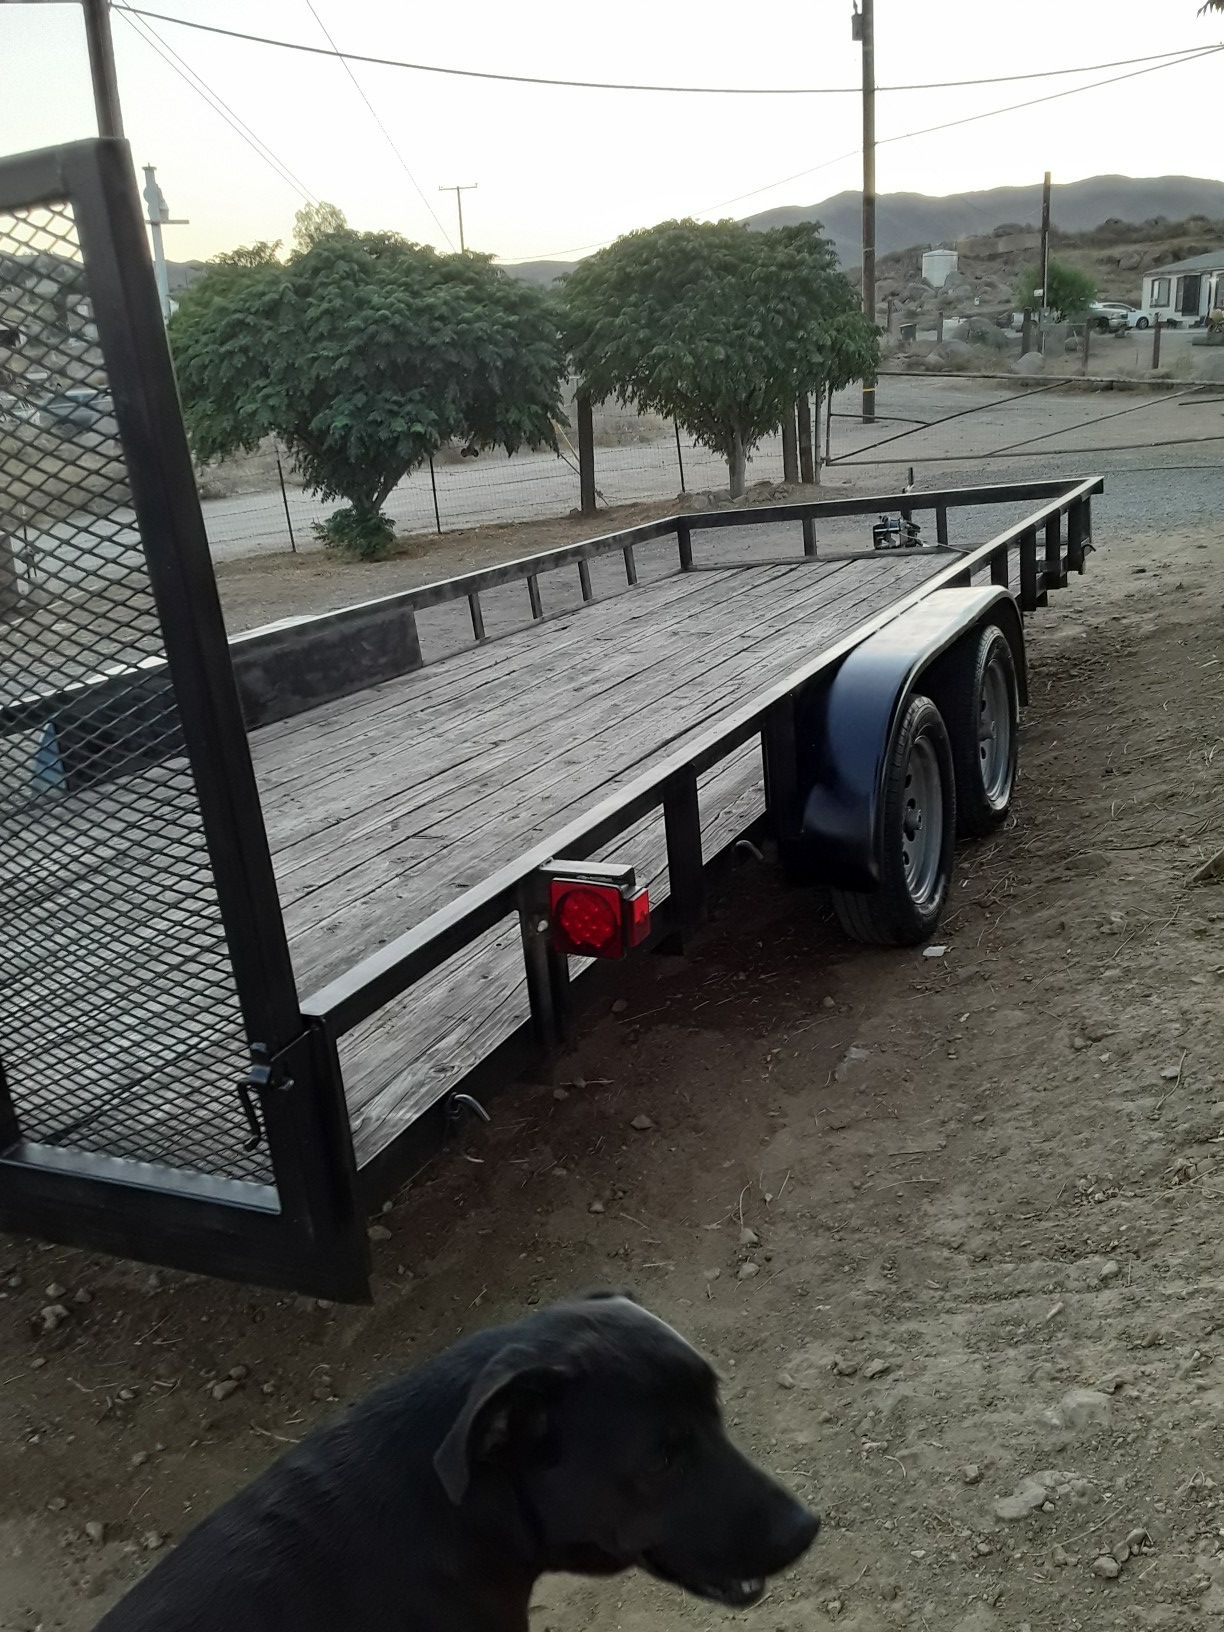 2006 Carson trailer 20 x 7 great name brand ready for work or play